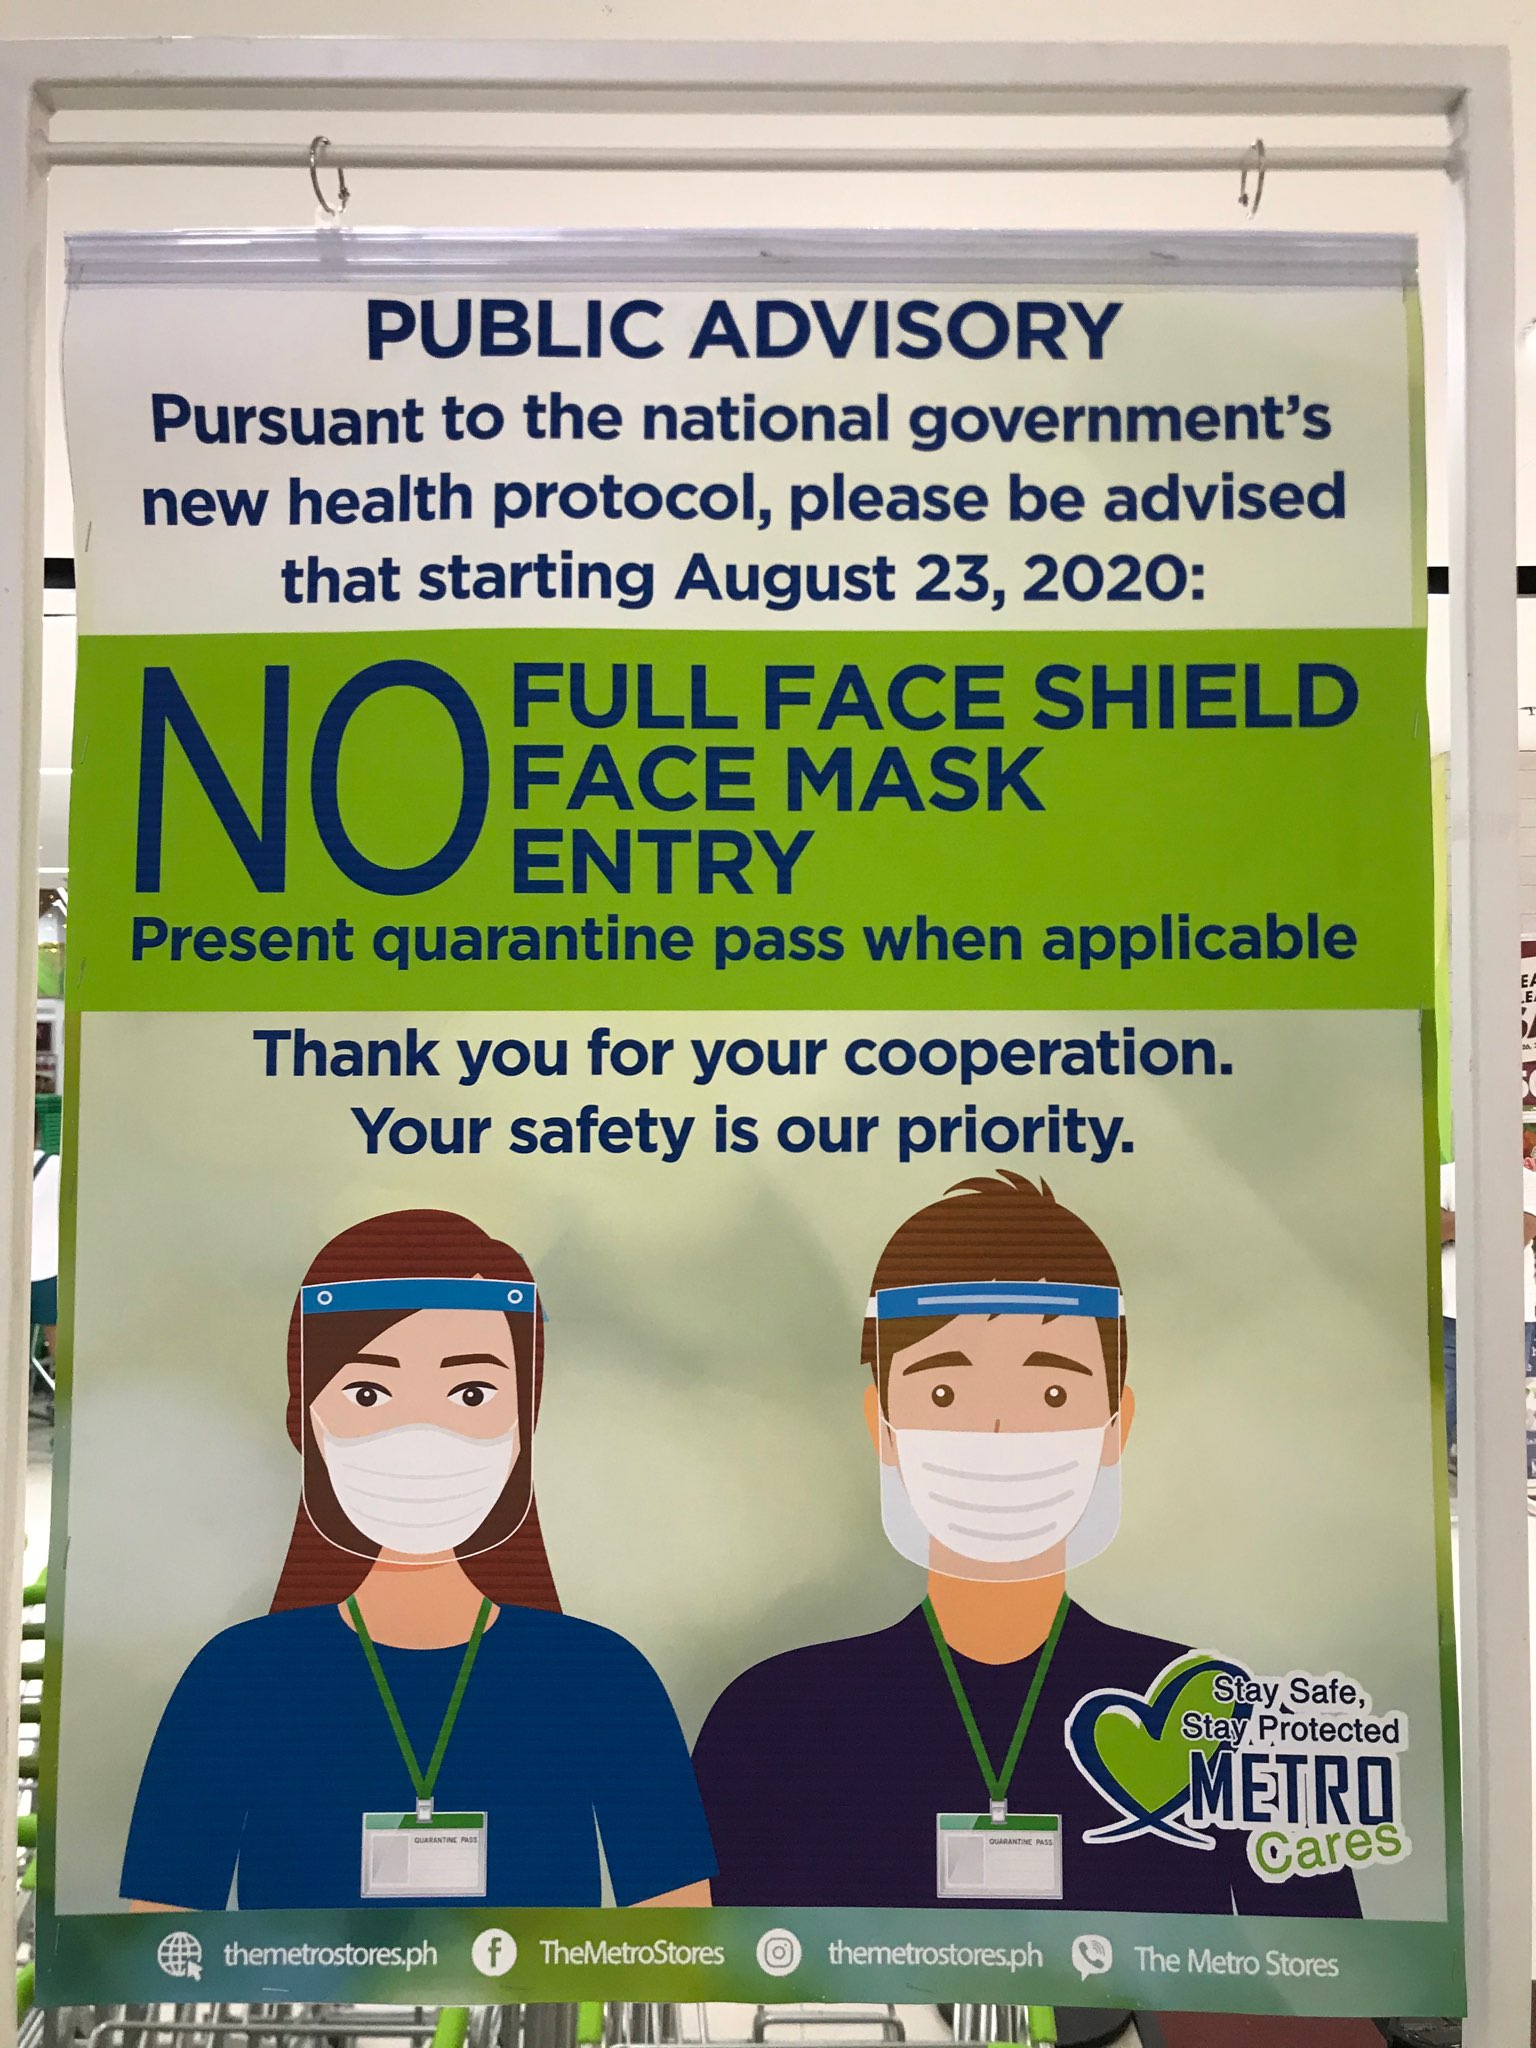 It is mandatory to wear a mask and face shield even in the metro.